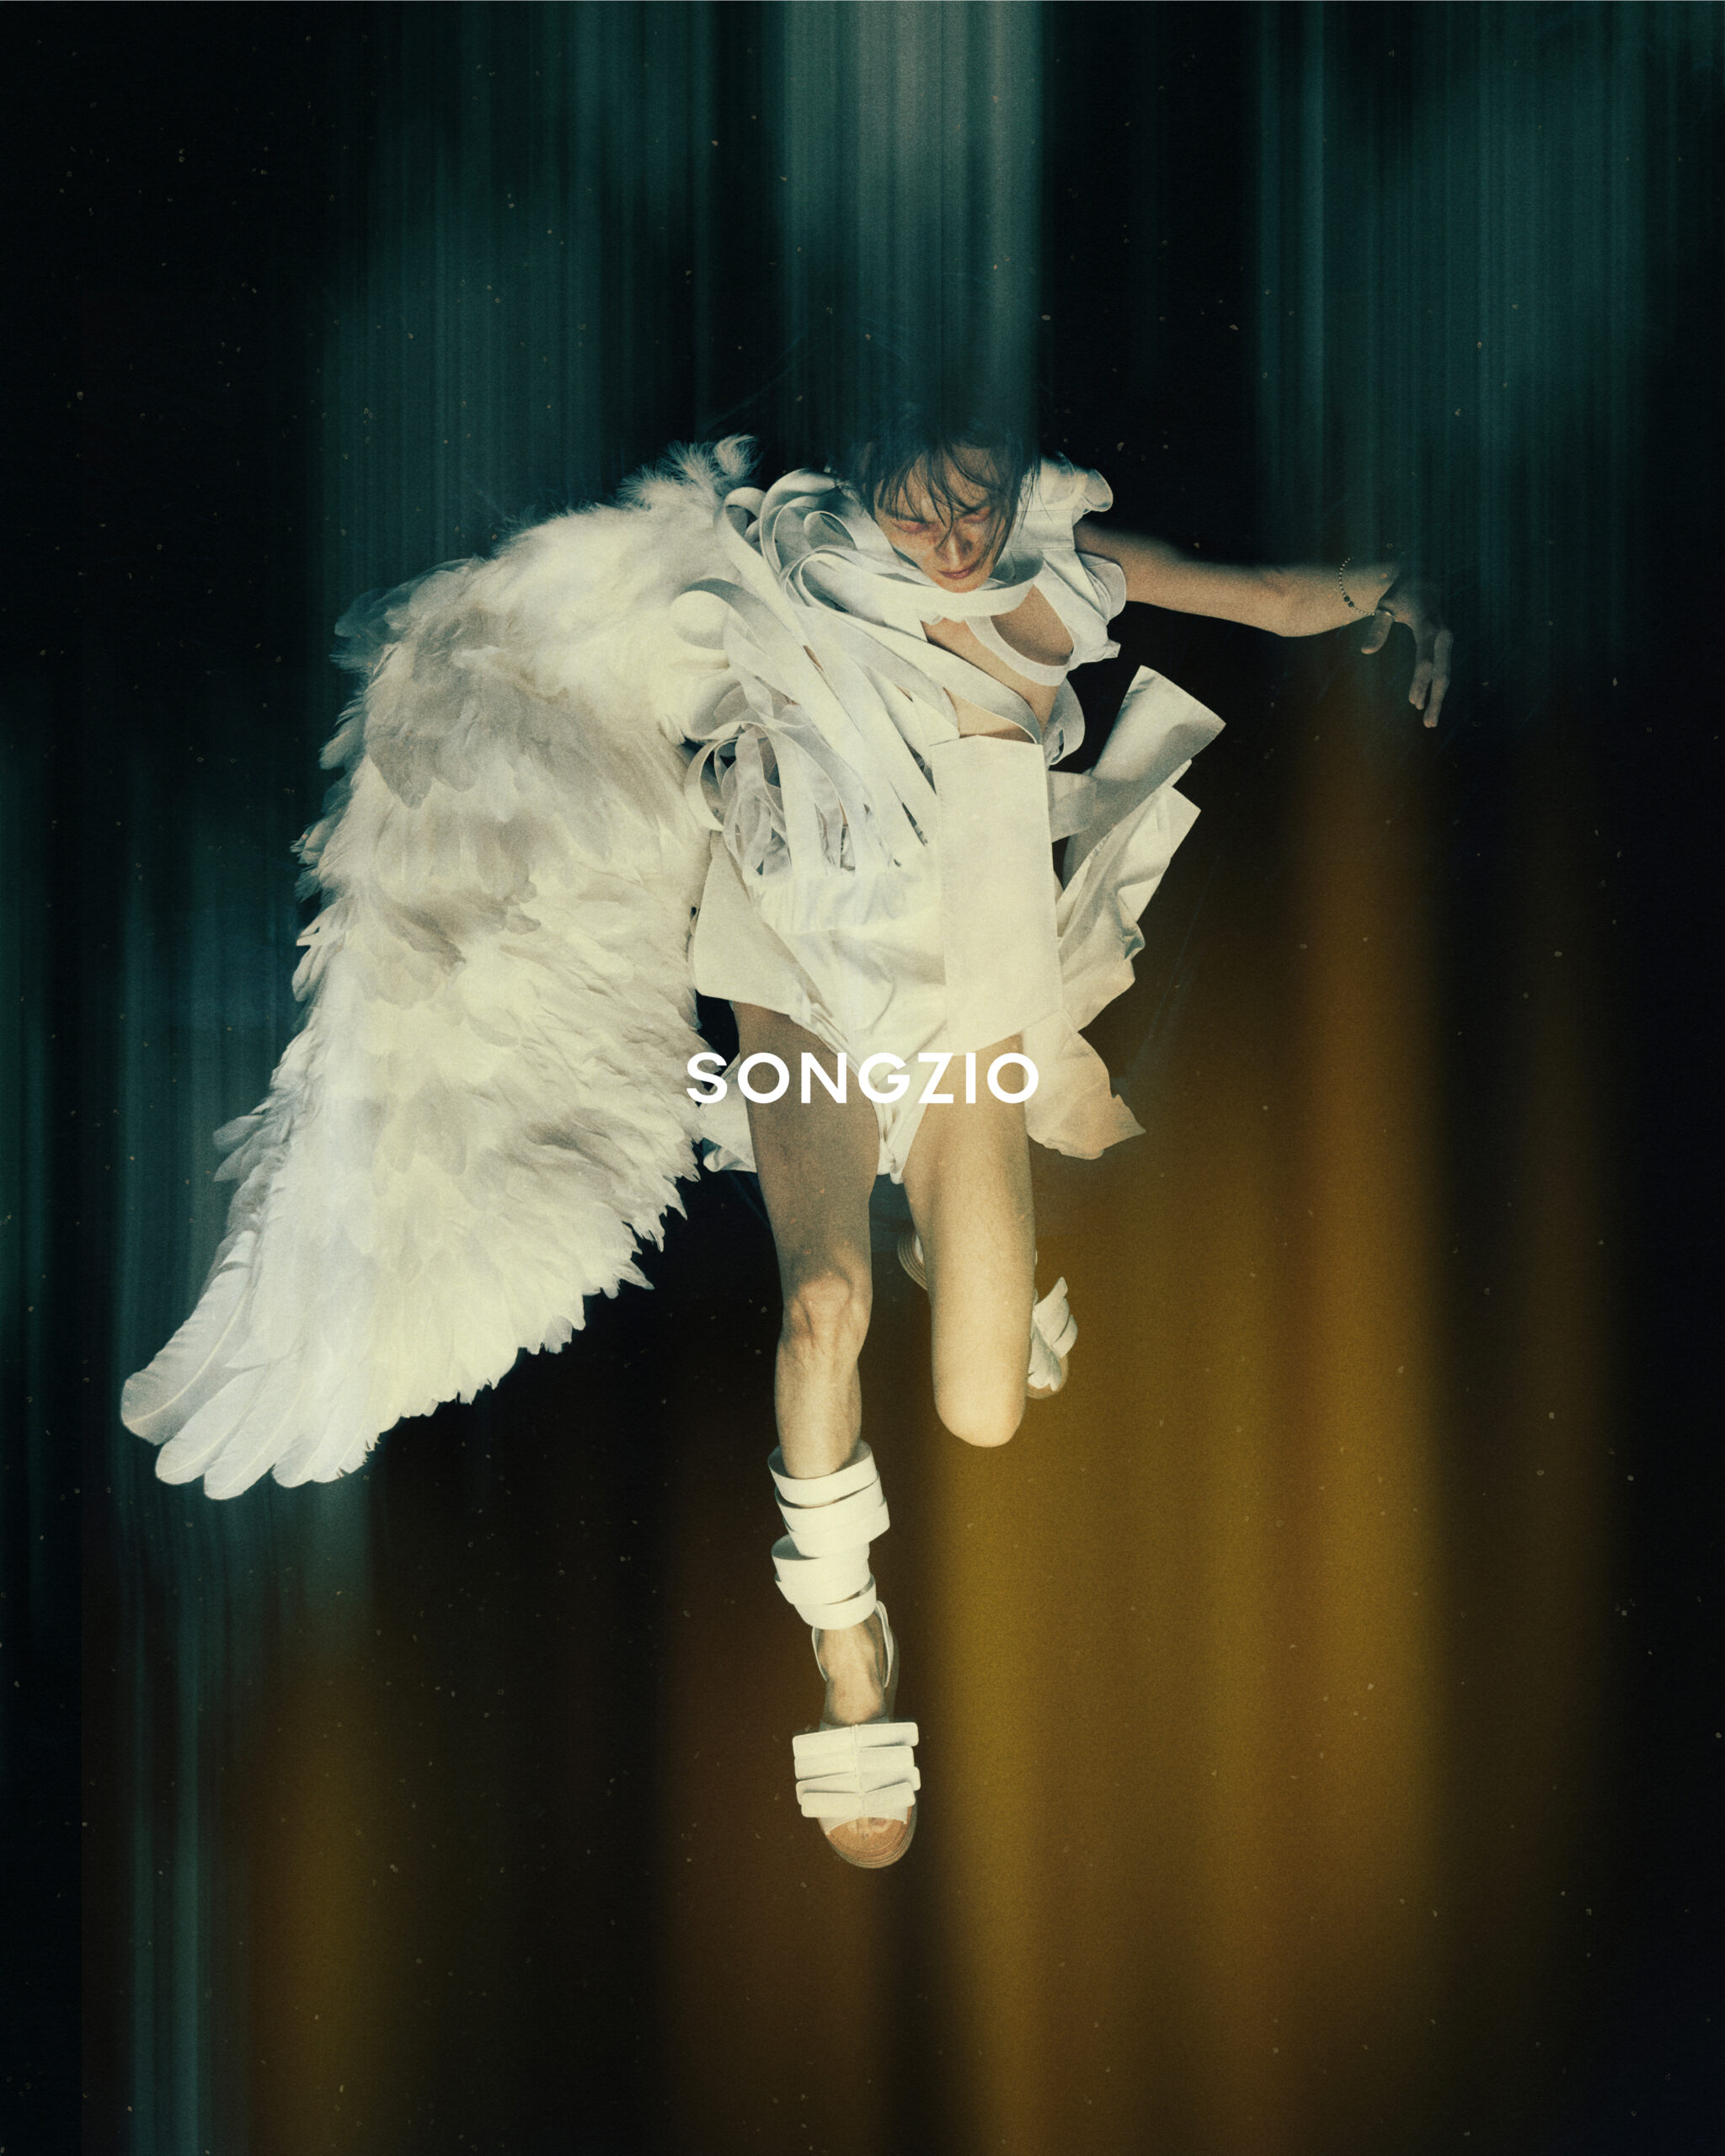 An artistic image featuring a figure adorned with white feathered wings and textured garments, suspended in mid-air against a backdrop of dark vertical streaks and golden light, with "SONGZIO" written at the bottom.